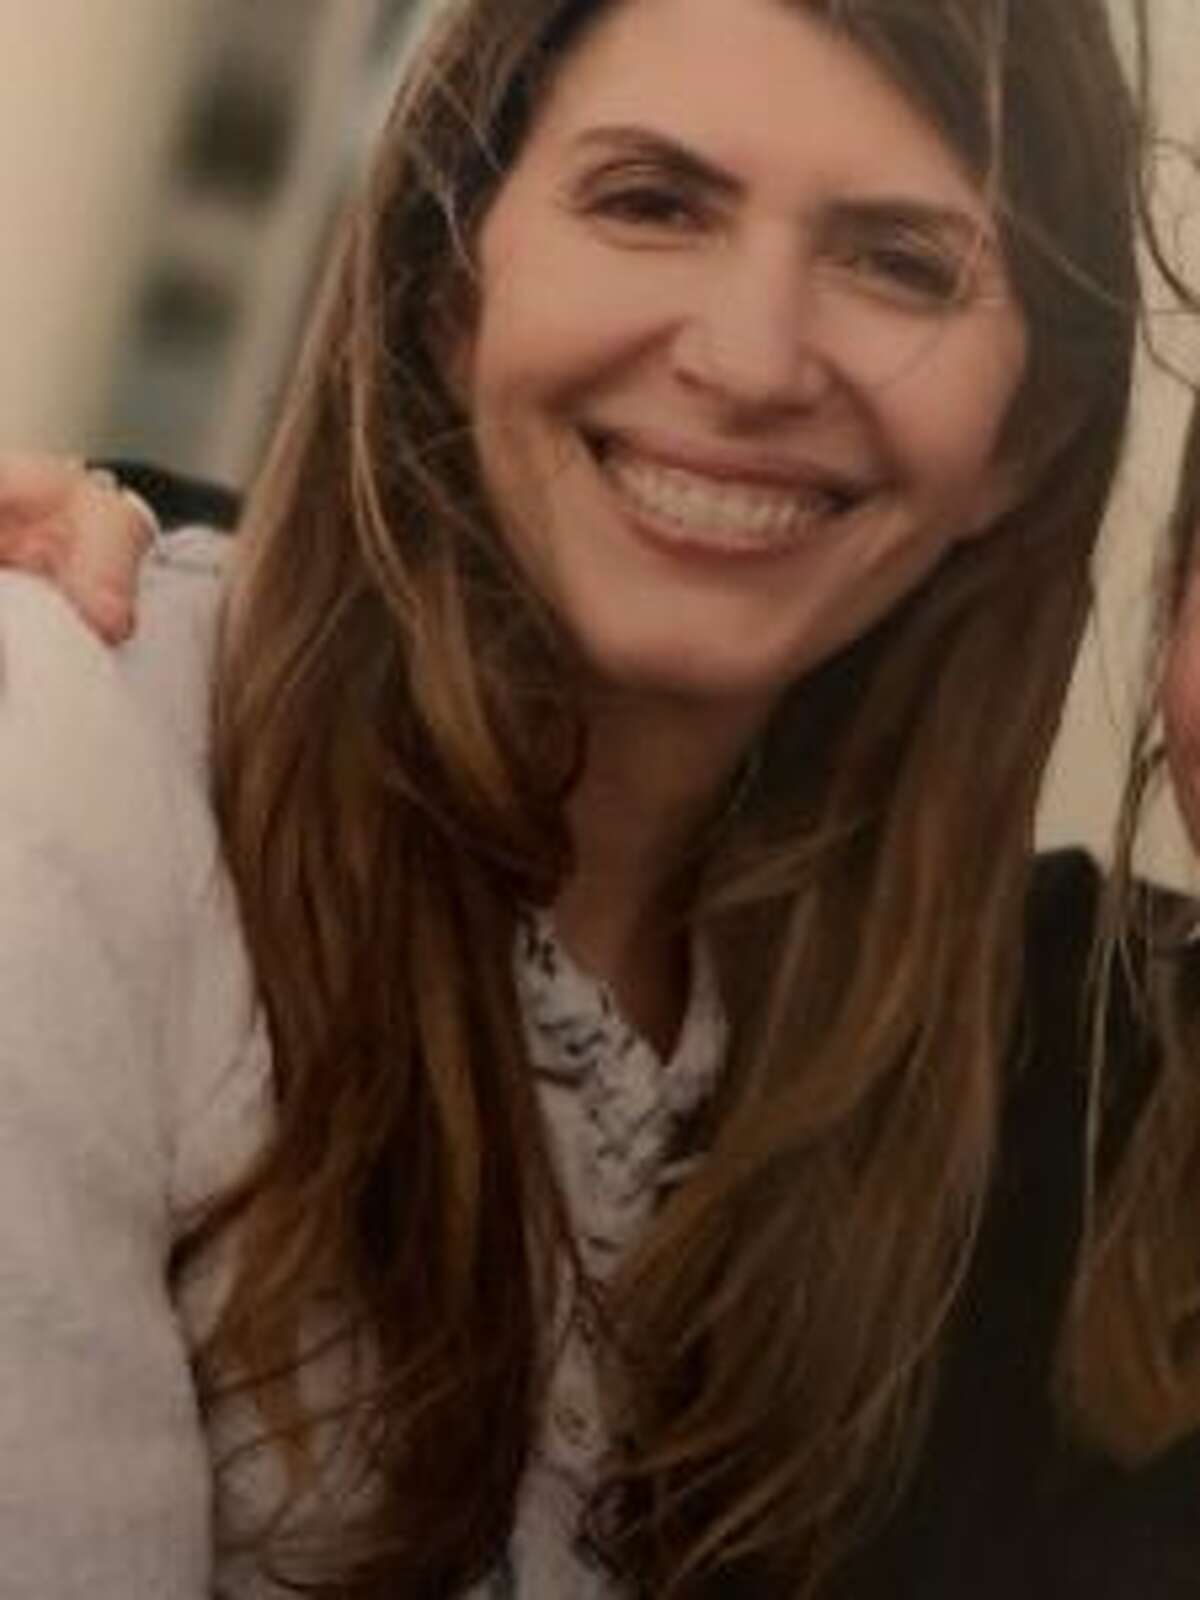 New Canaan and State police are searching for Jennifer Dulos, 50, who was reported missing Friday evening, May 24. Contributed photo